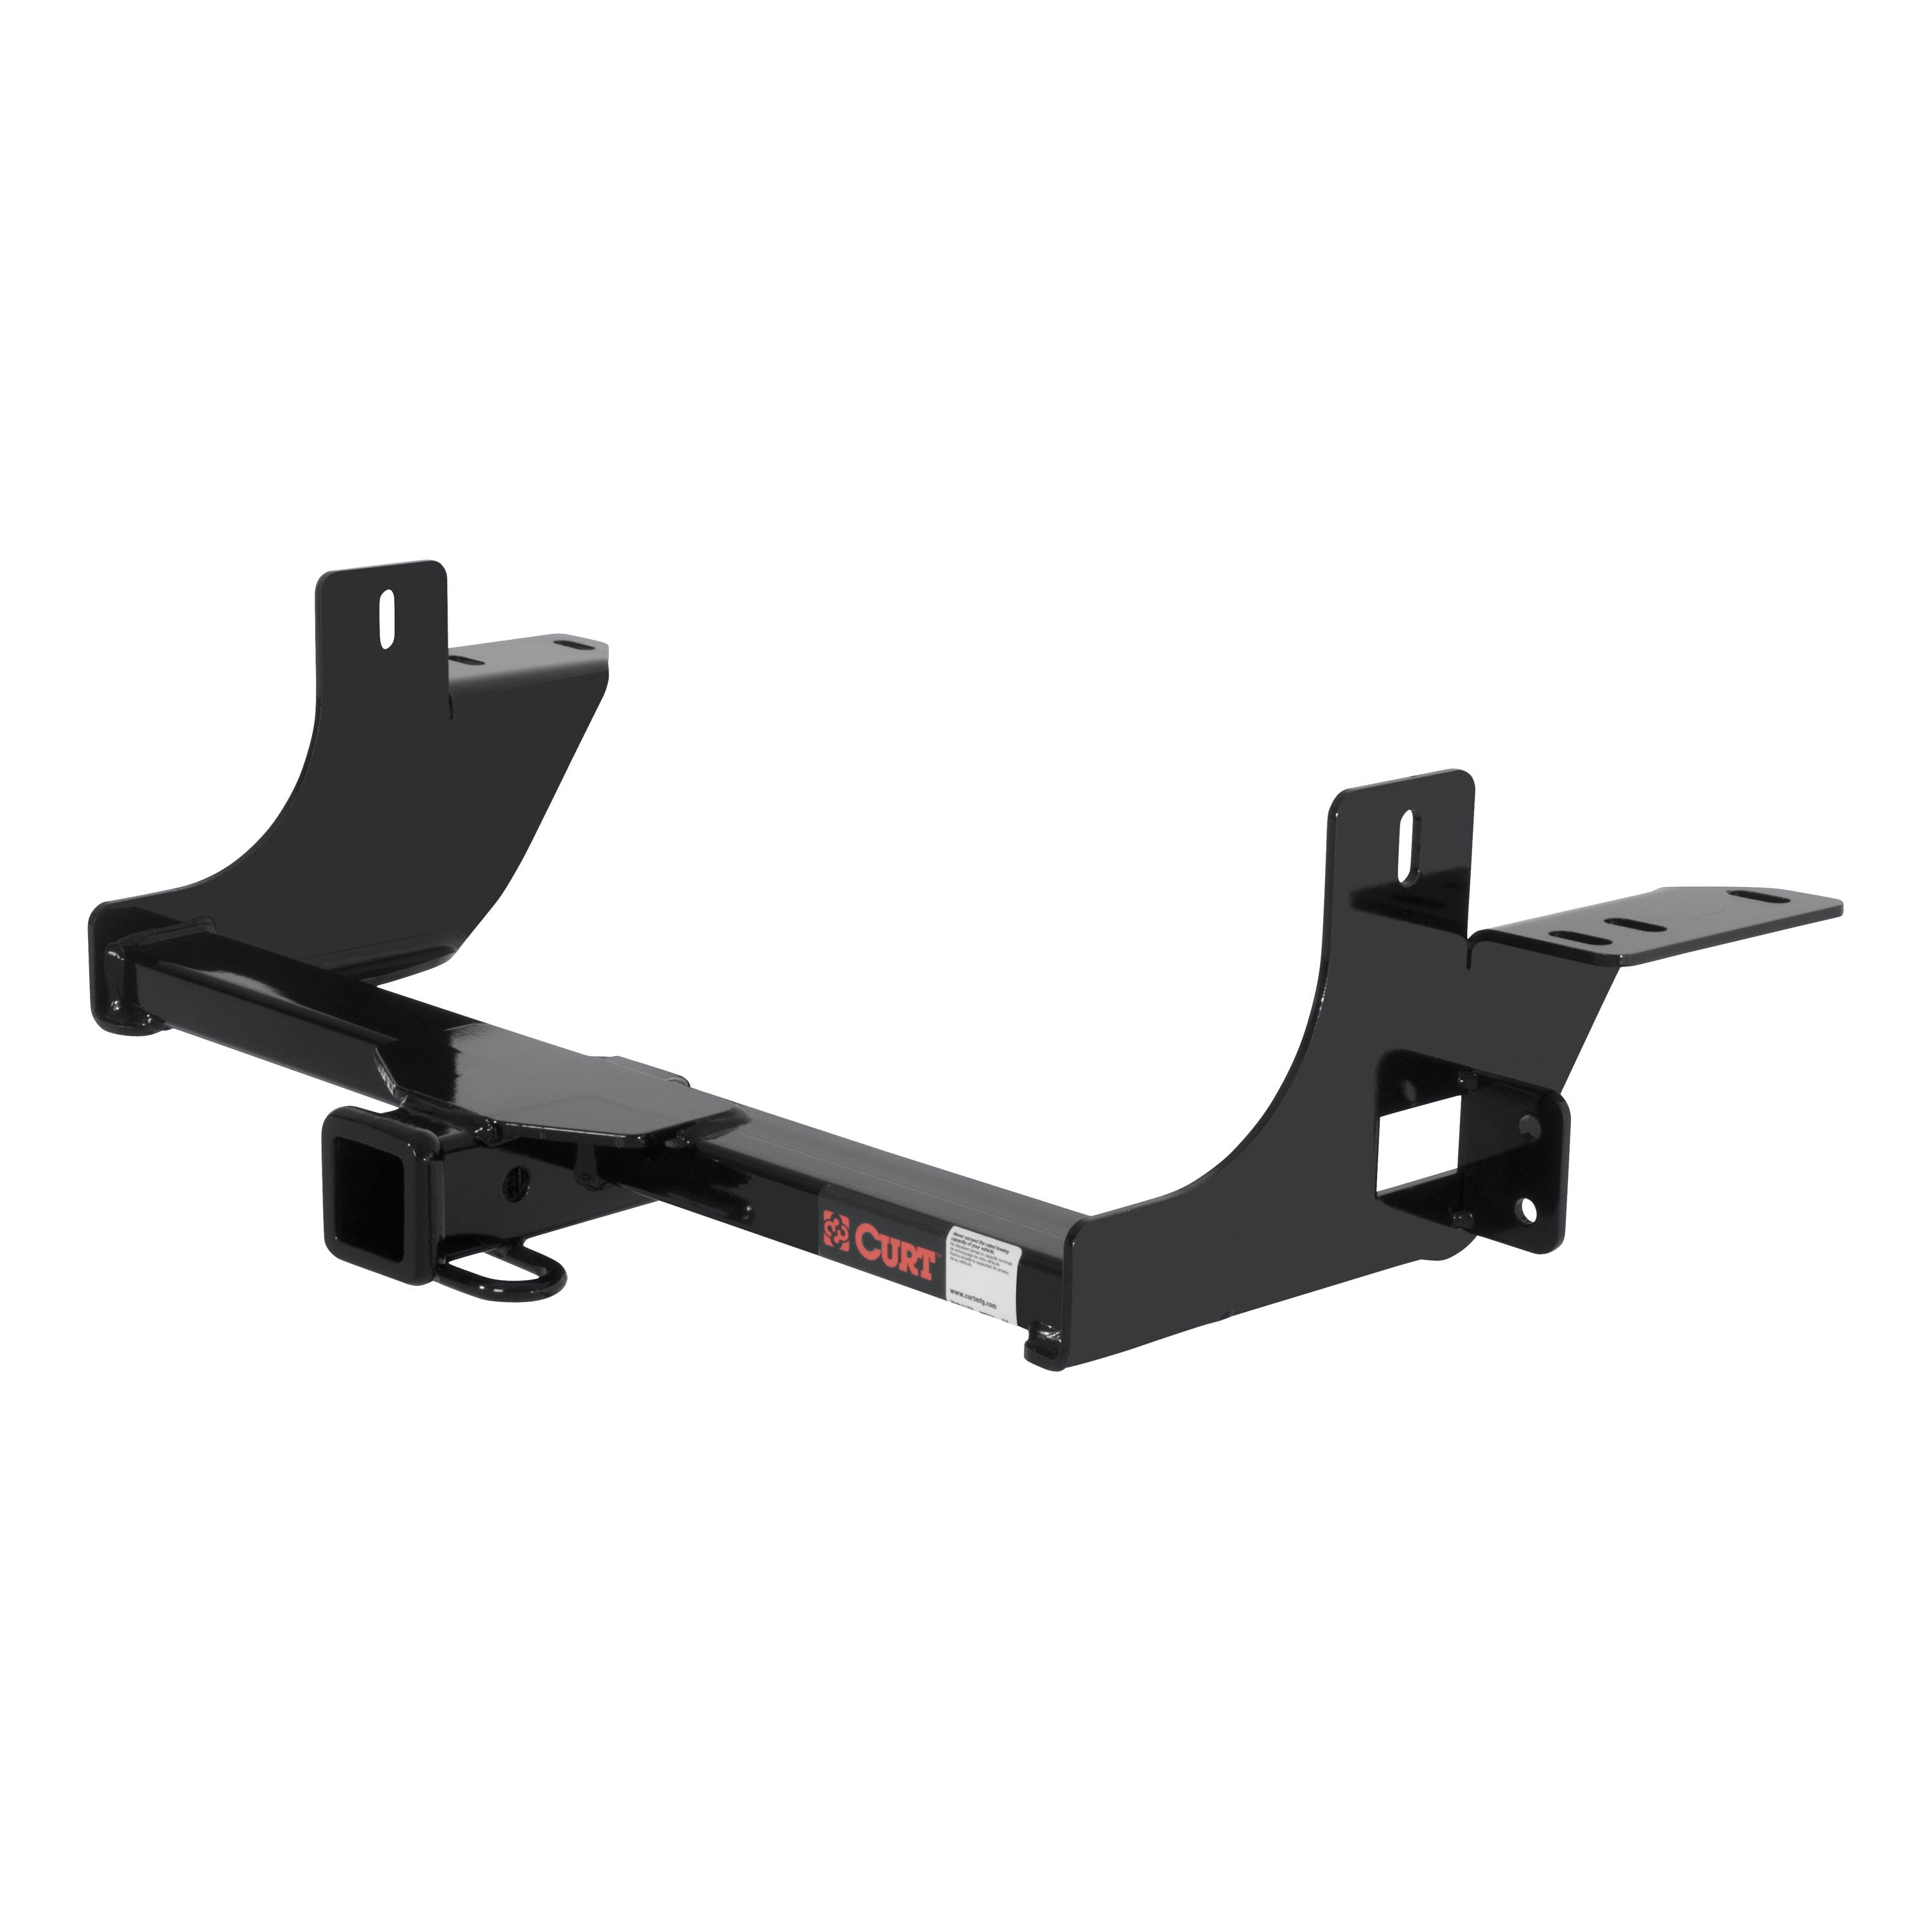 CURT 13336 Class 3 Hitch, 2, Select Buick, Chevrolet, Pontiac, Saturn (Exposed Main Body)